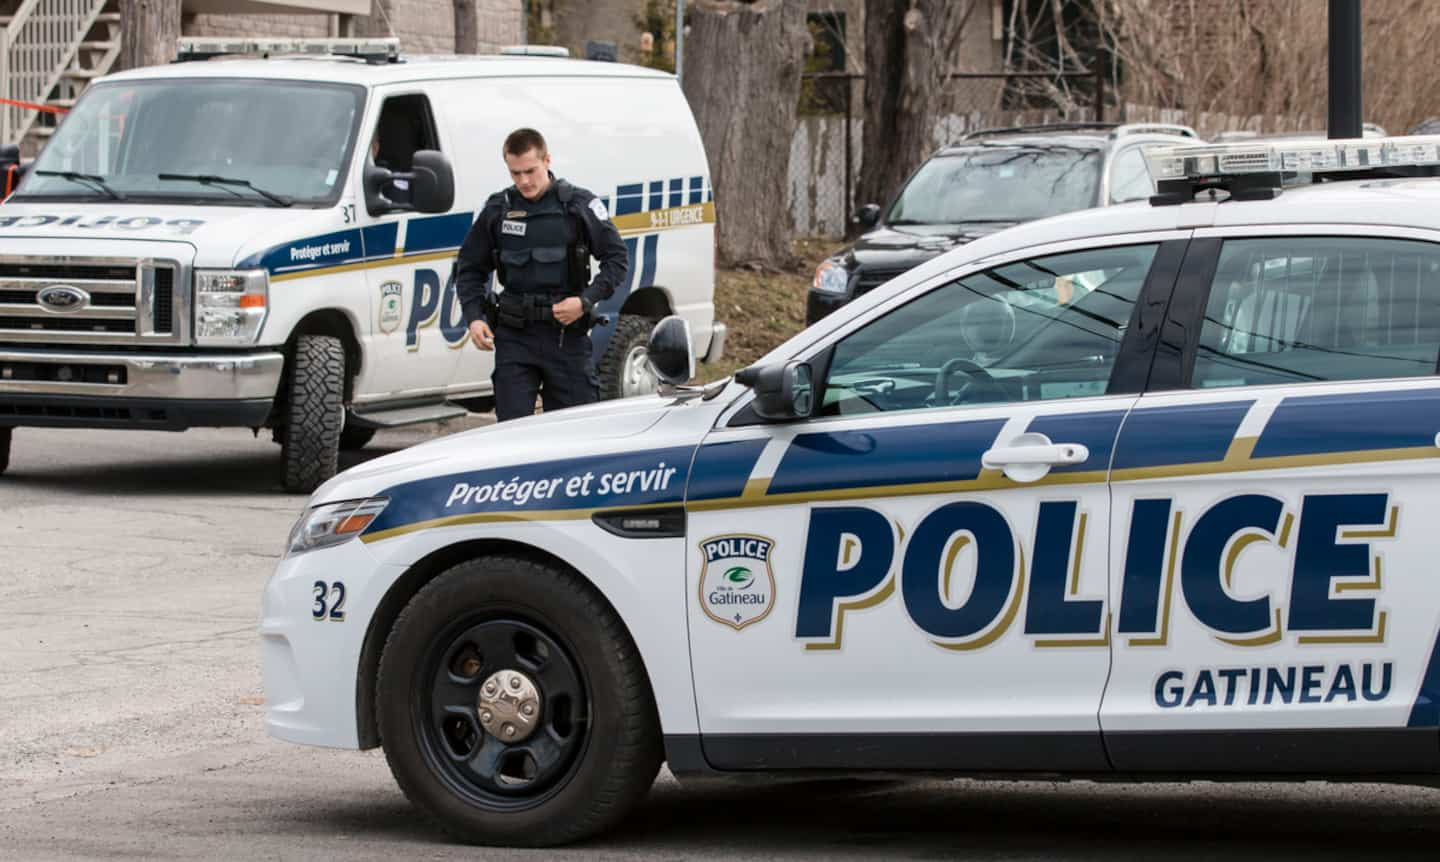 An octogenarian attacked with a knife in a Gatineau residence